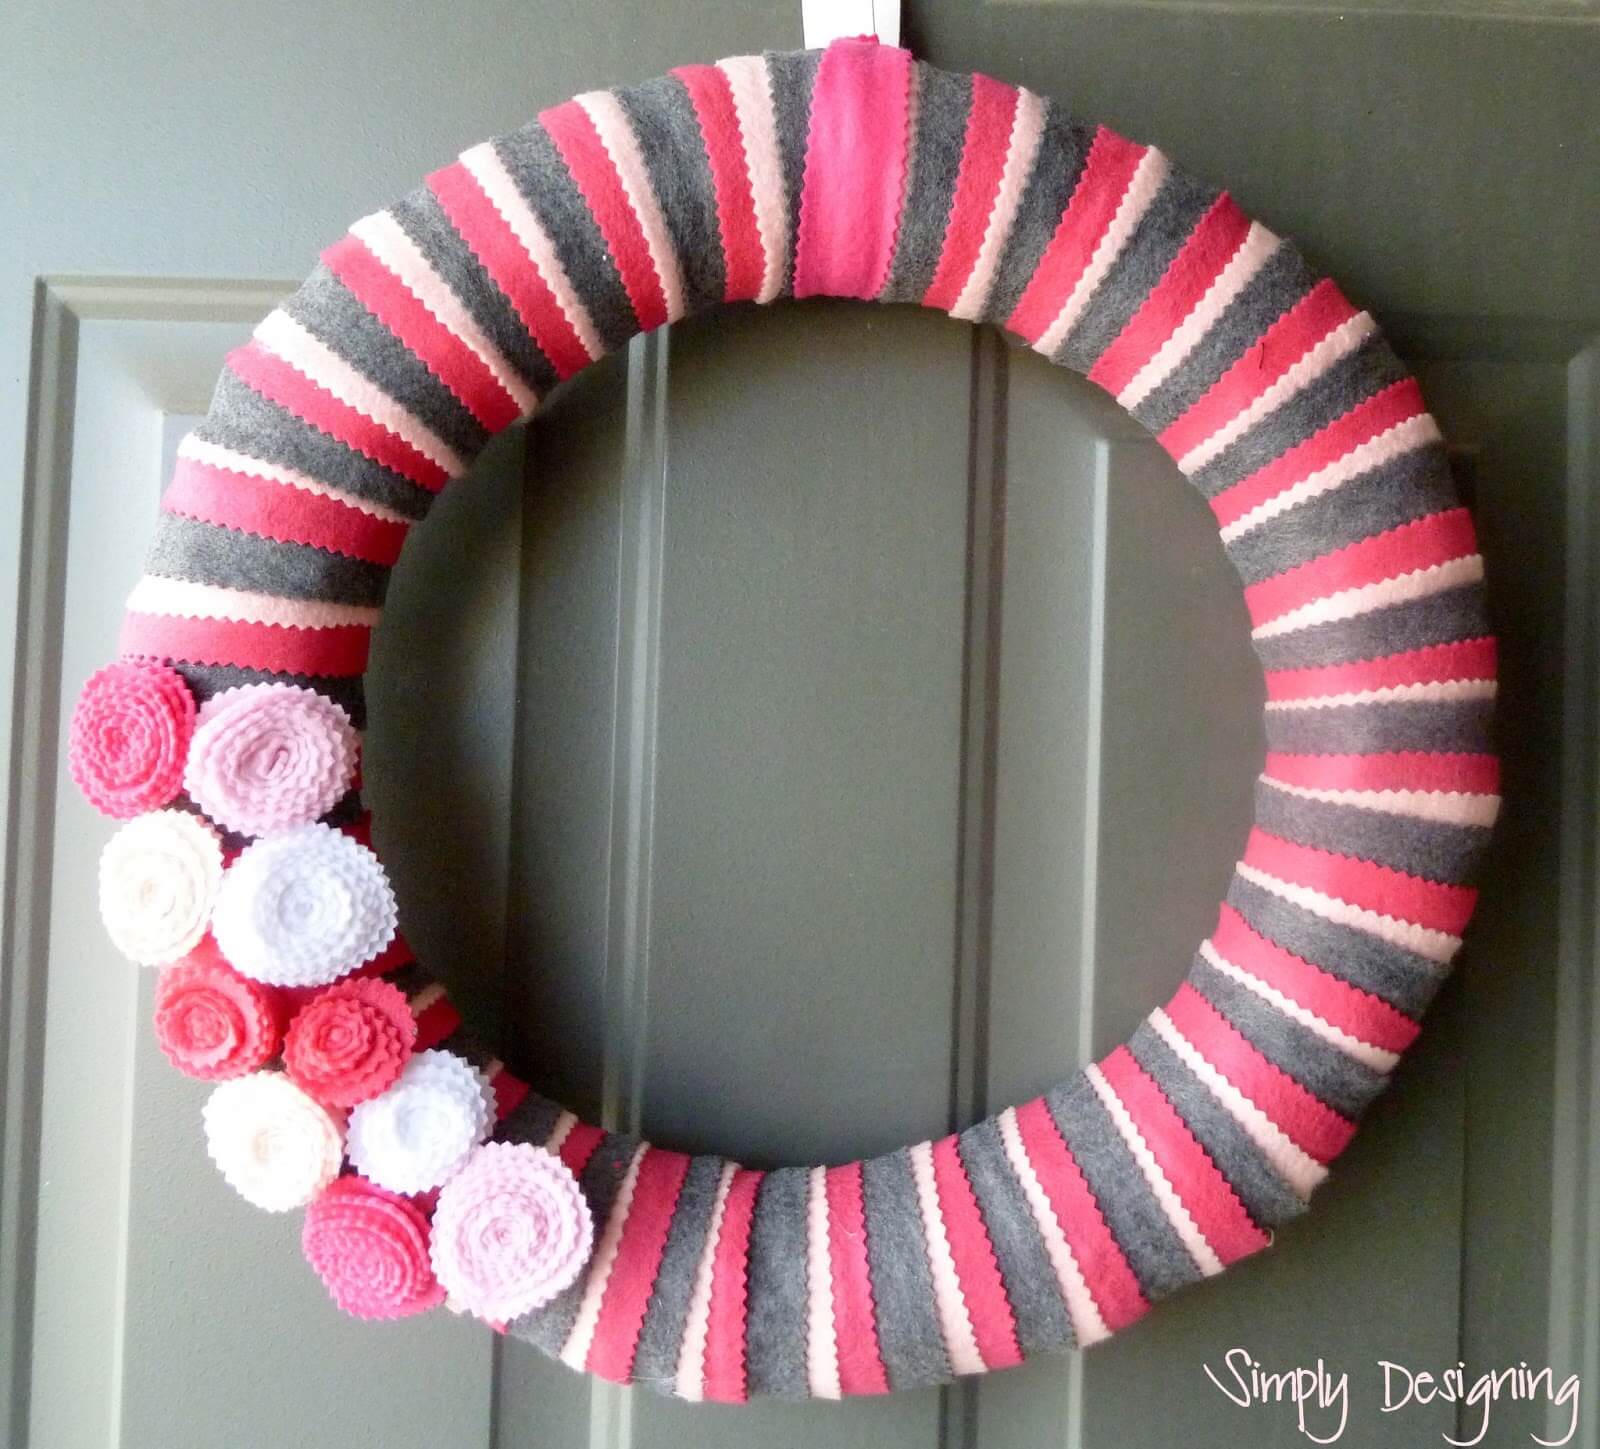 Felt Wrapped Wreath with Flowers